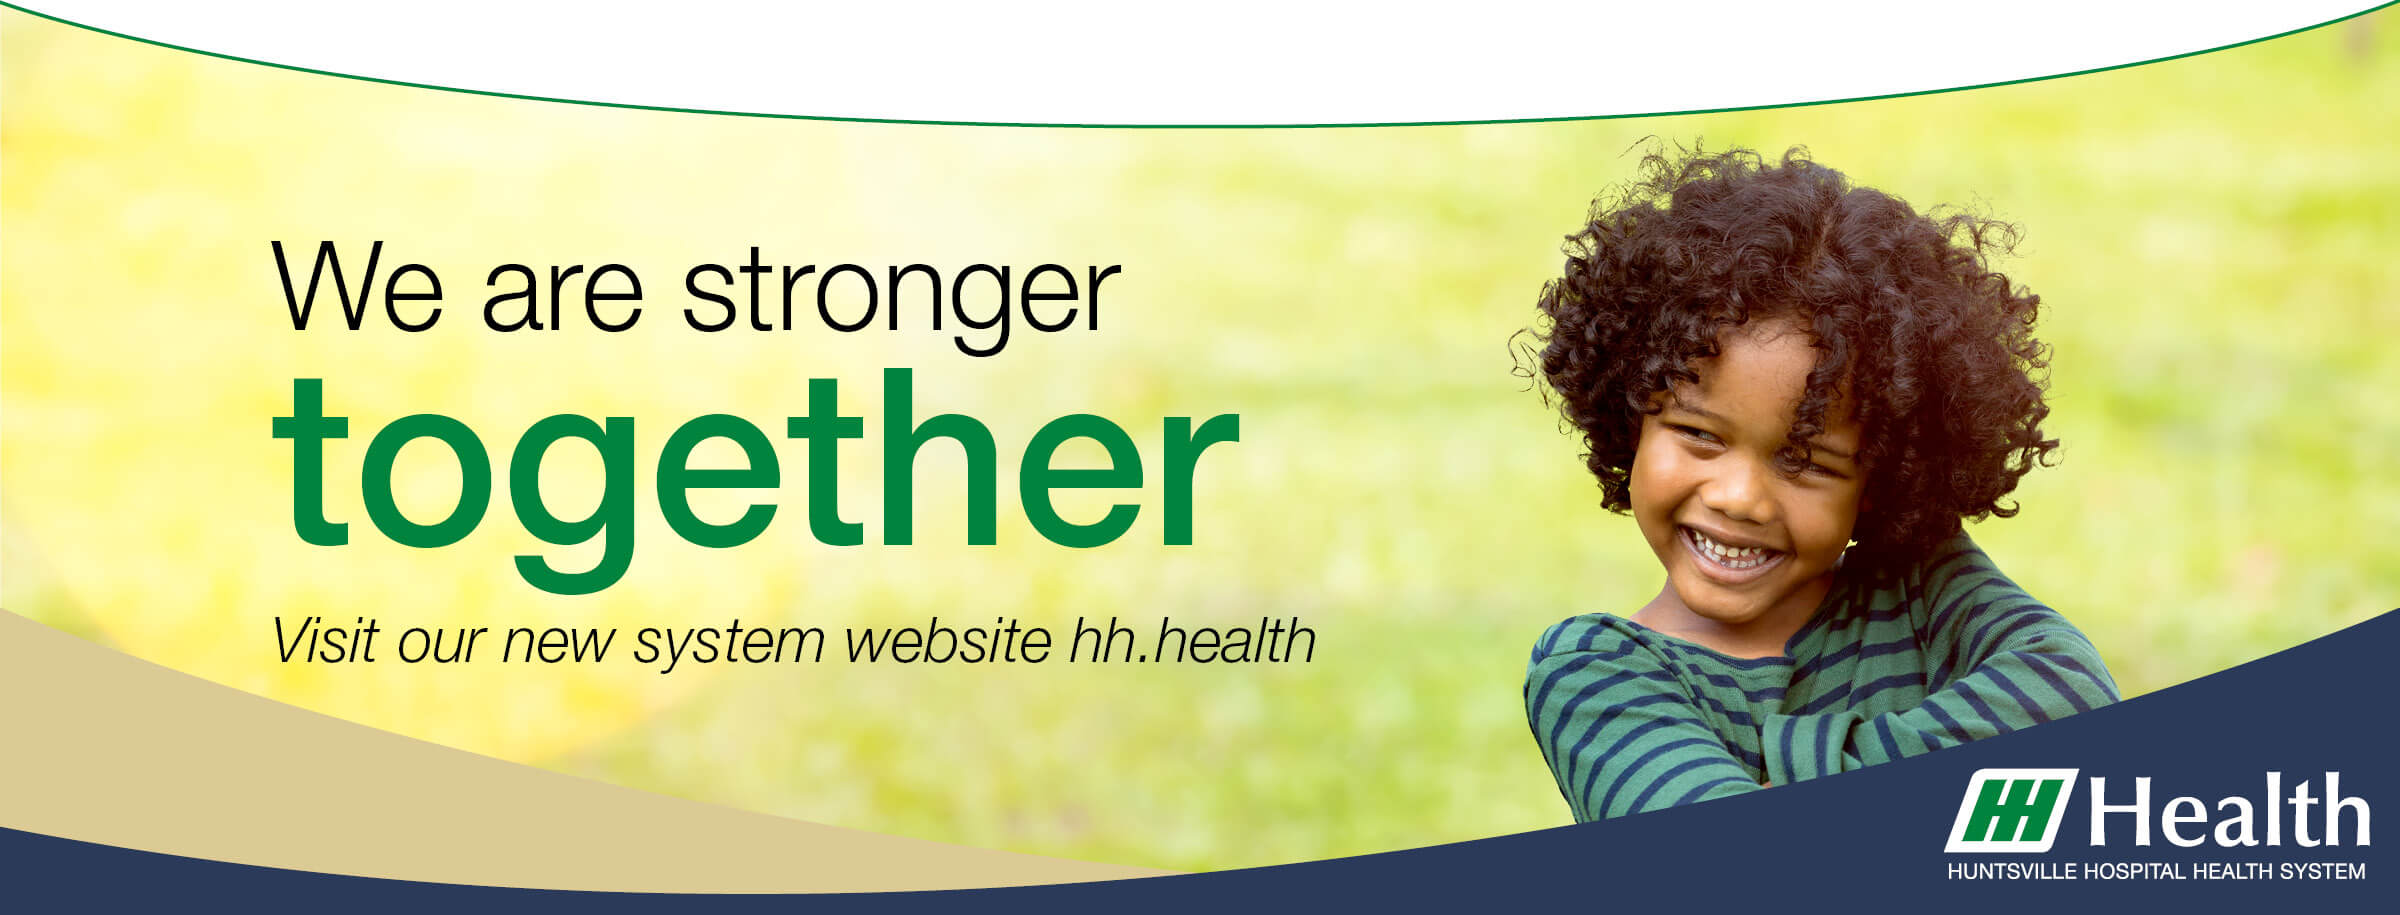 HH Health Stronger Together Rotator ARCH